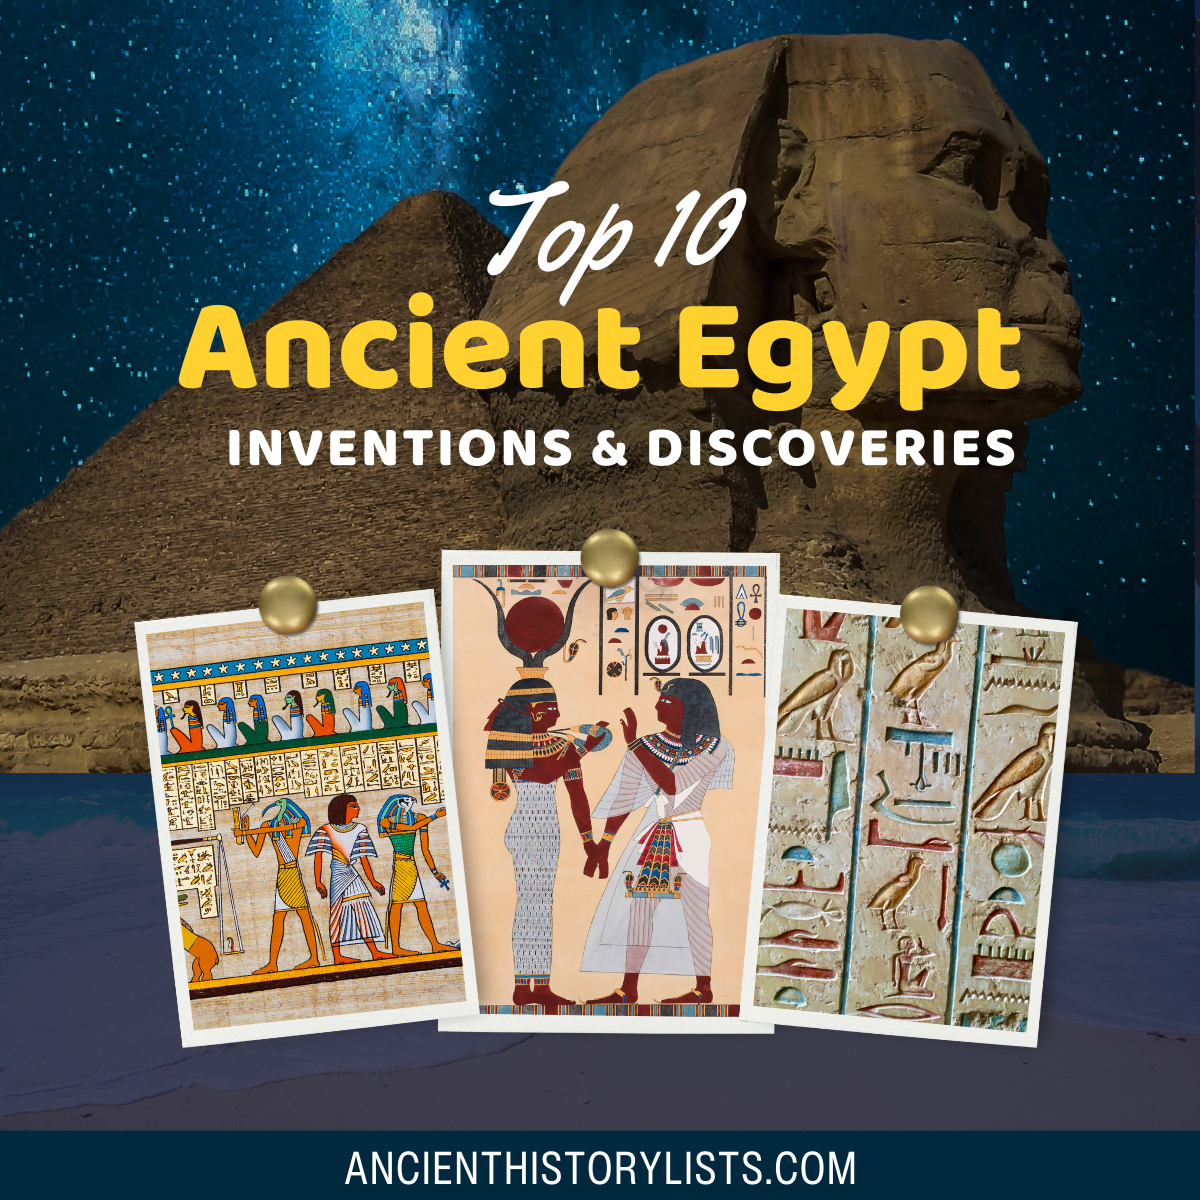 Discoveries of Ancient Egypt